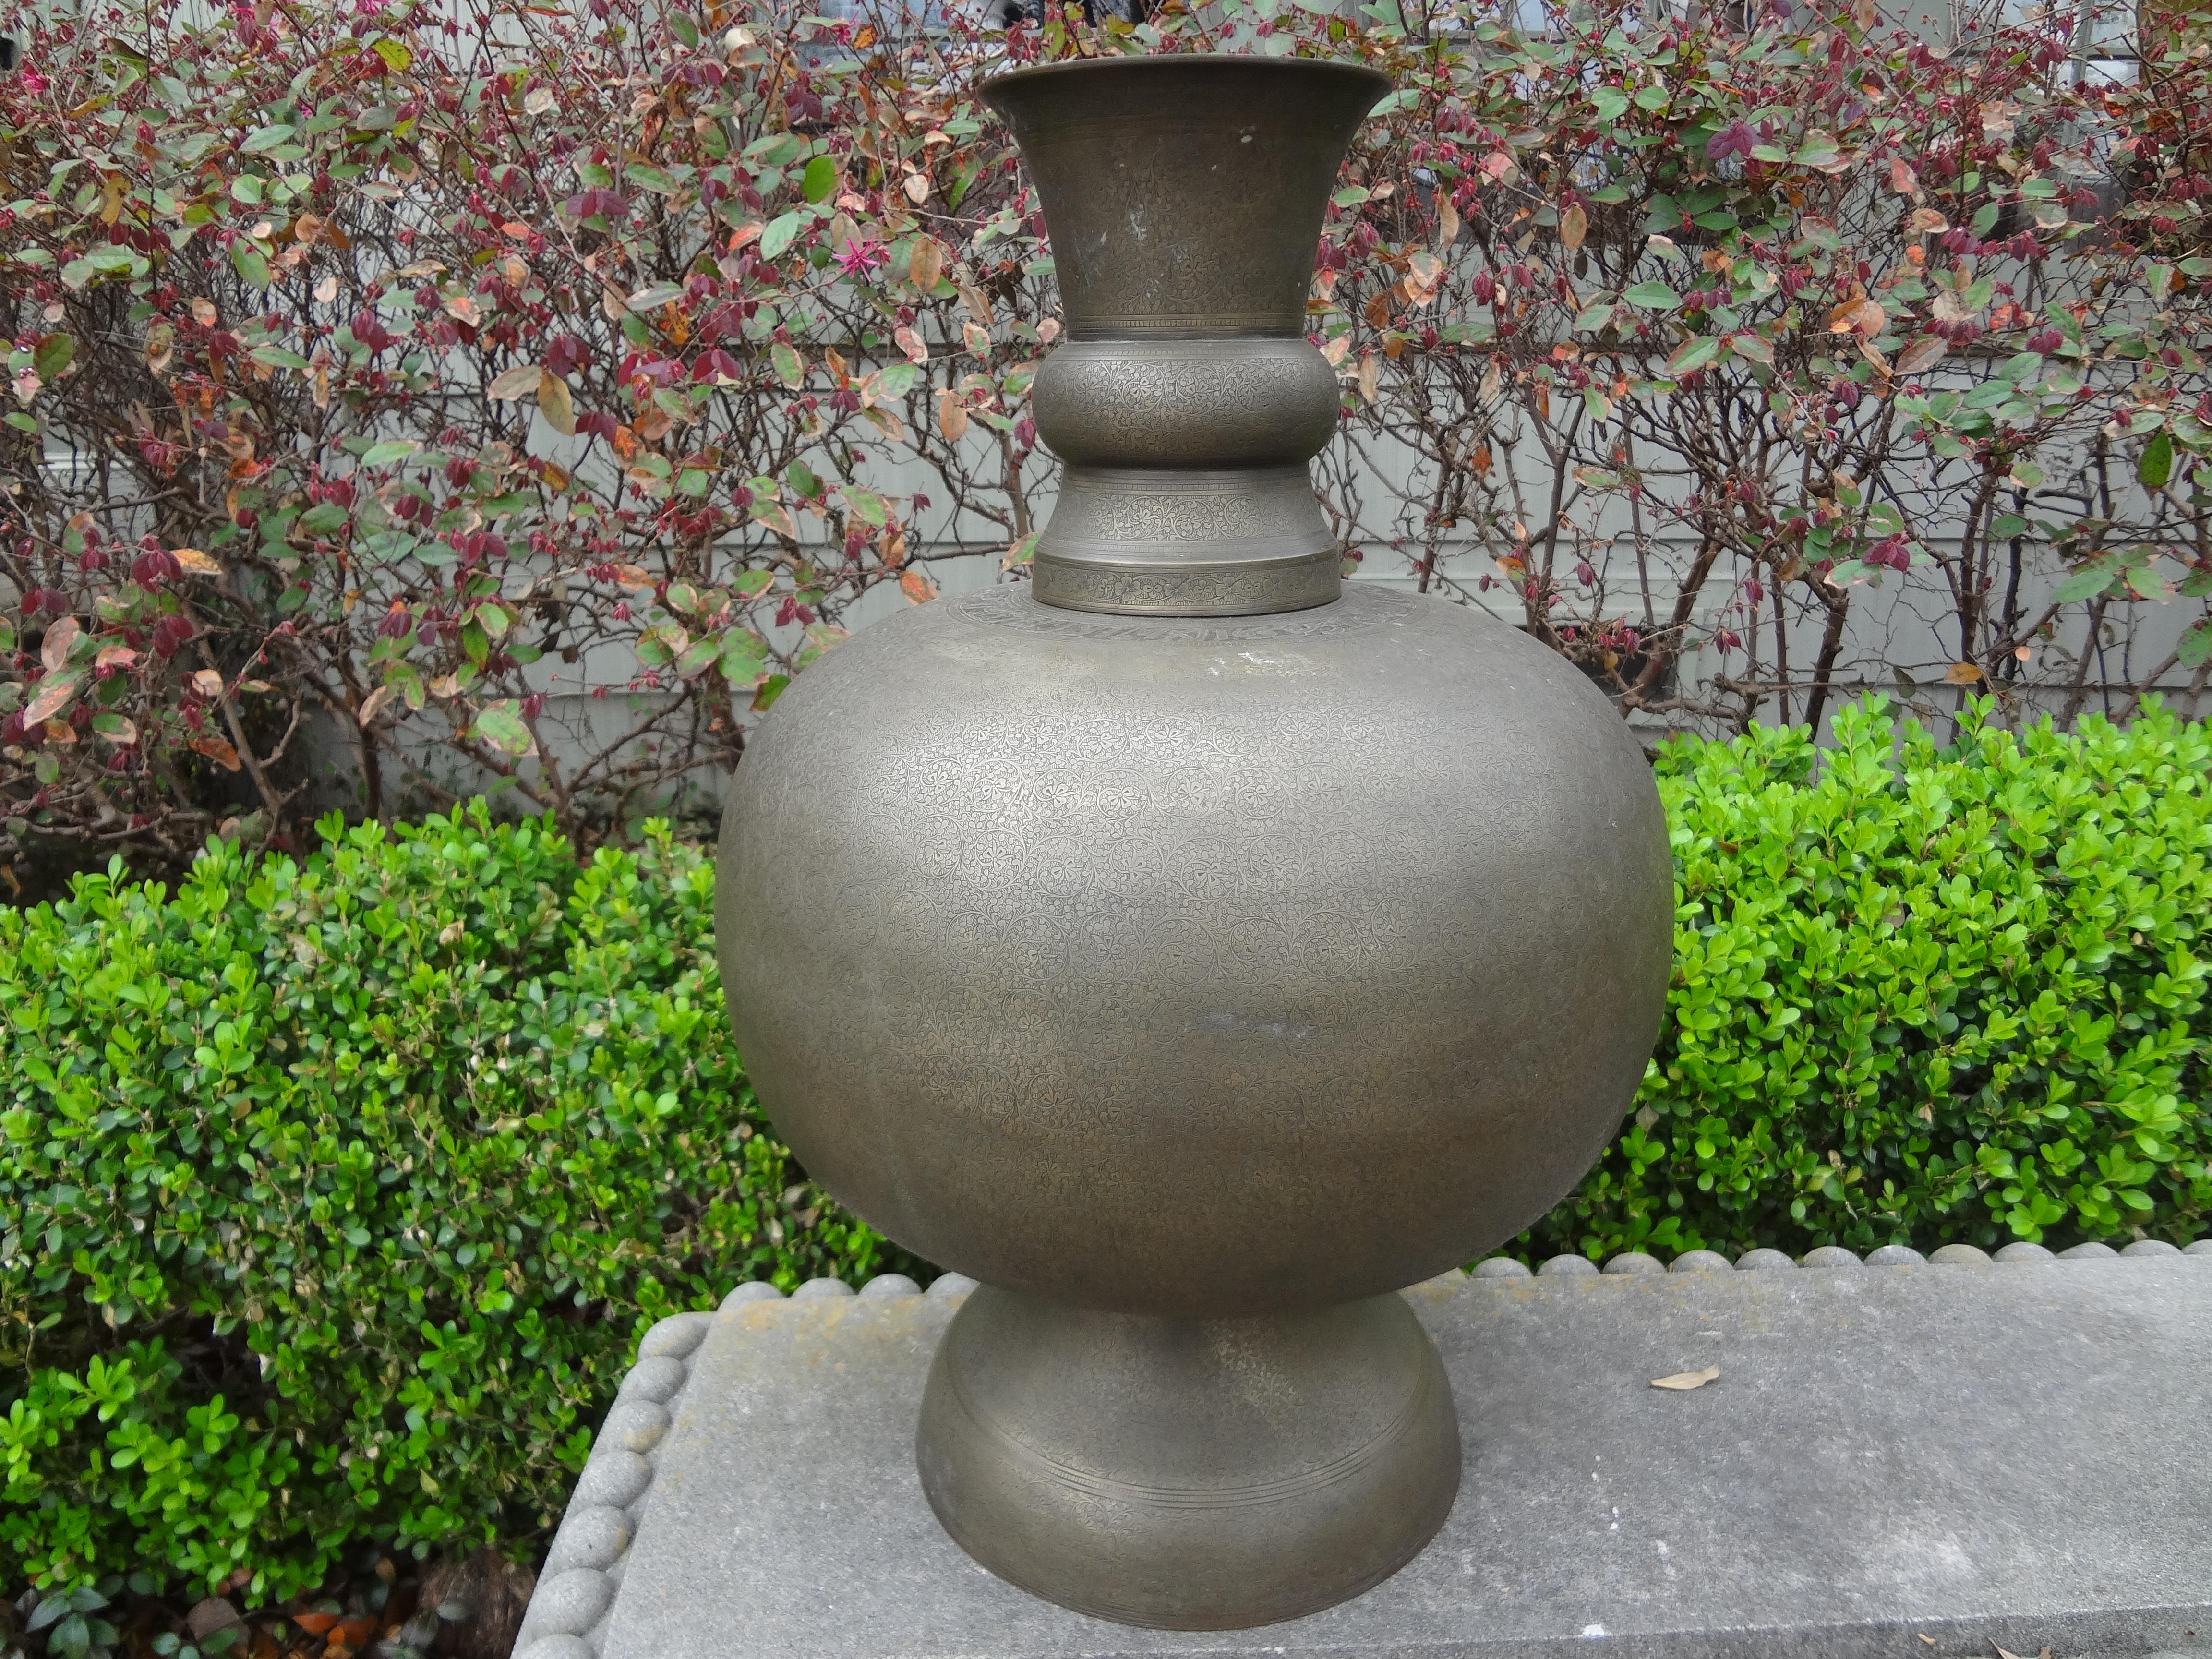 Large middle Eastern Arabesque style etched brass urn.
Stunning huge middle Eastern Arabesque style hand etched brass urn, vessel or vase. This gorgeous heavy weight Moorish style brass urn has intricate etching with writing across the top section.